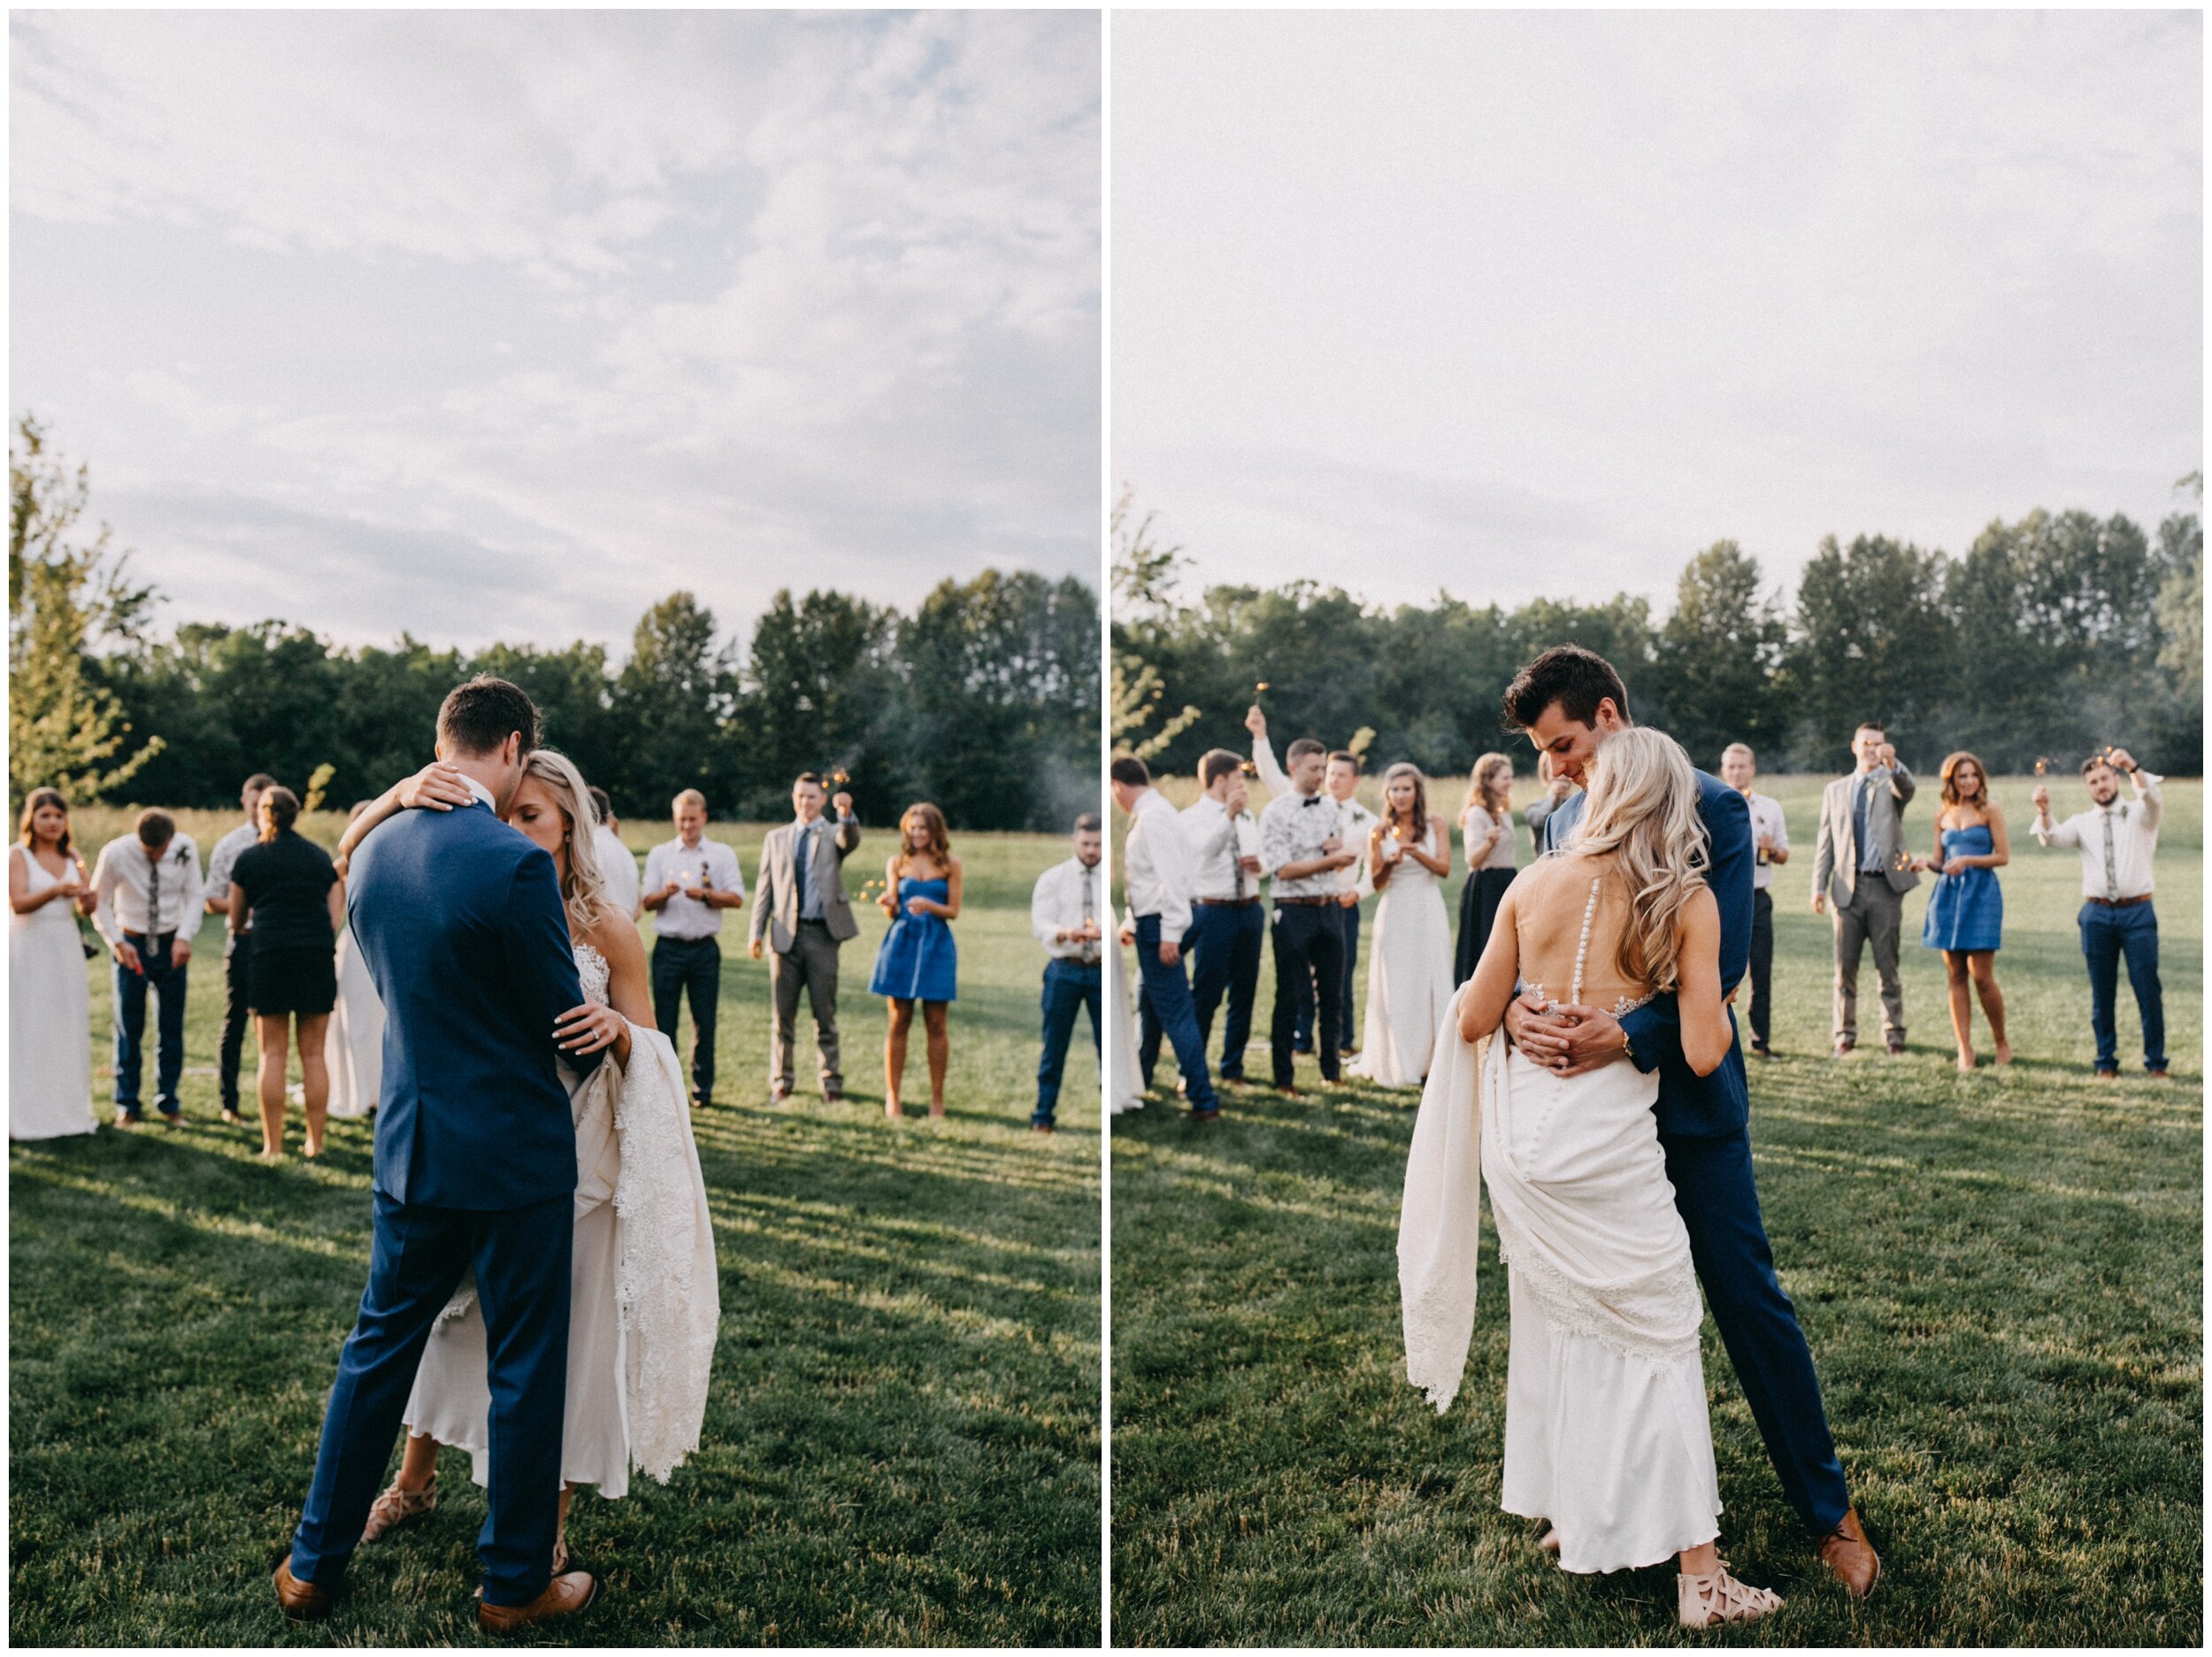 Bride and groom dancing while guests surround them holding sparklers at Creekside Farm wedding